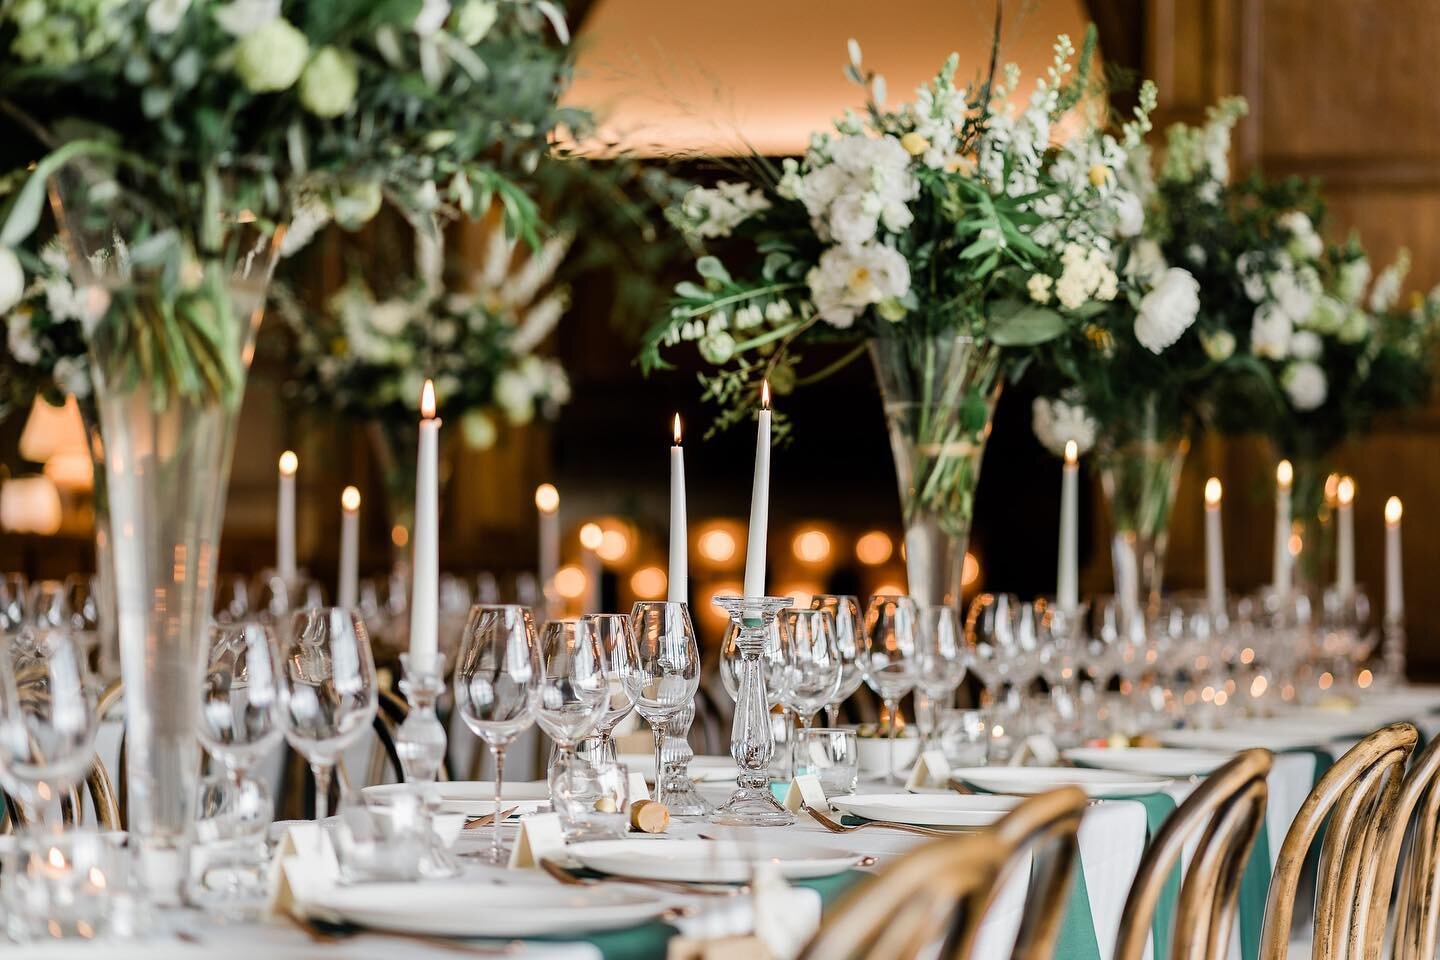 THE MUSIC ROOM // Tall florals are the dream. If your florist doesn&rsquo;t have the vases, we do 👏 

Wedding: M&amp;L, May 2021 - May 2022
Florals: @tigerstolilies 
Photographer: @jessy_papasavva_photo 
Glasses &amp; Linen: @cohire 

#balcombeplace